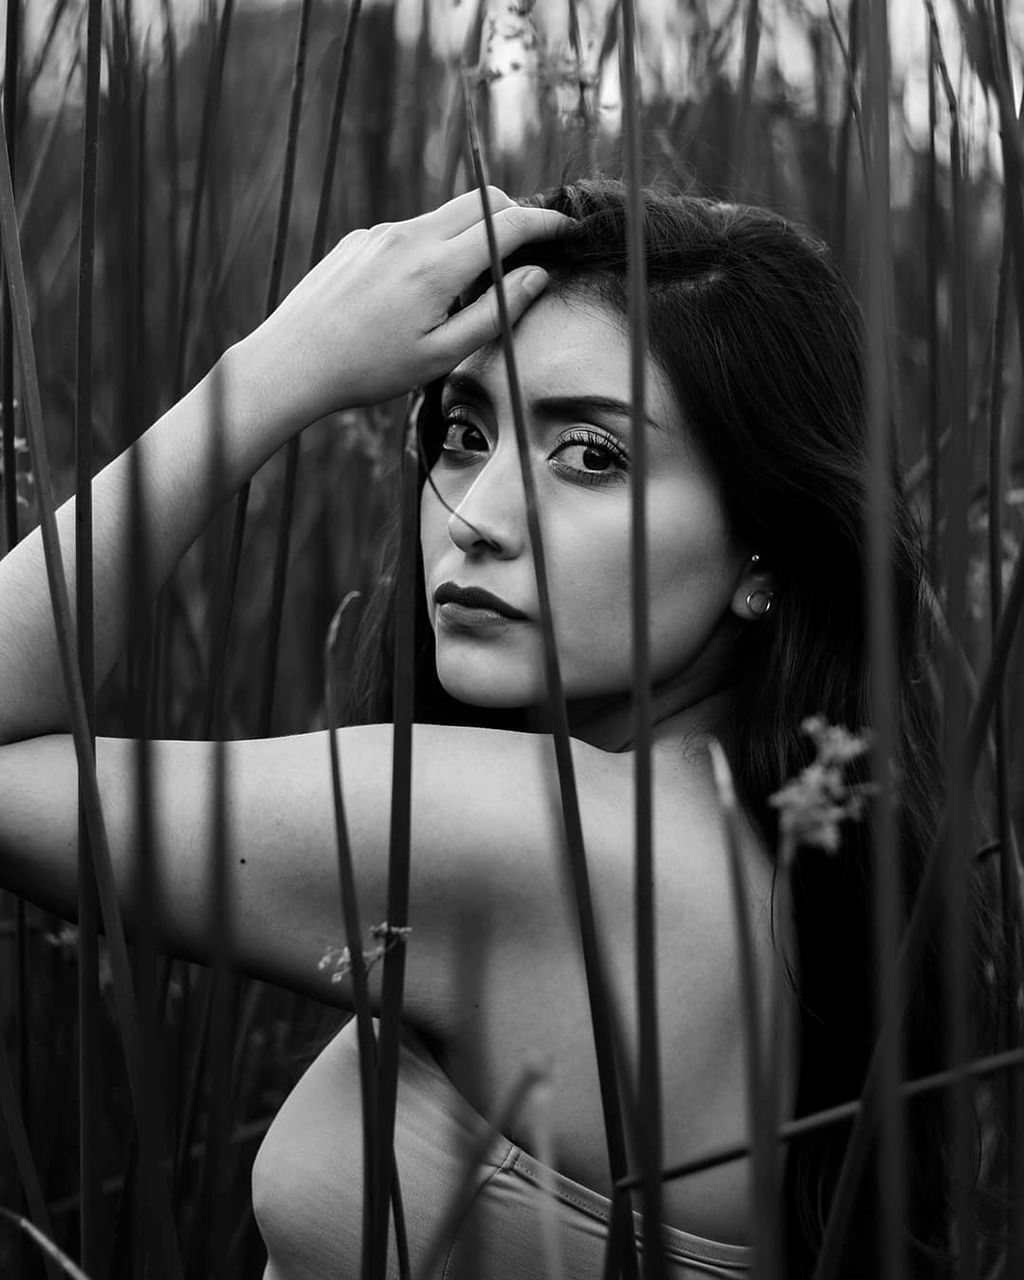 one person, black and white, portrait, women, young adult, black, adult, monochrome photography, monochrome, plant, female, photo shoot, looking at camera, fashion, portrait photography, white, tree, headshot, nature, hairstyle, lifestyles, looking, long hair, front view, leisure activity, outdoors, standing, person, land, focus on foreground